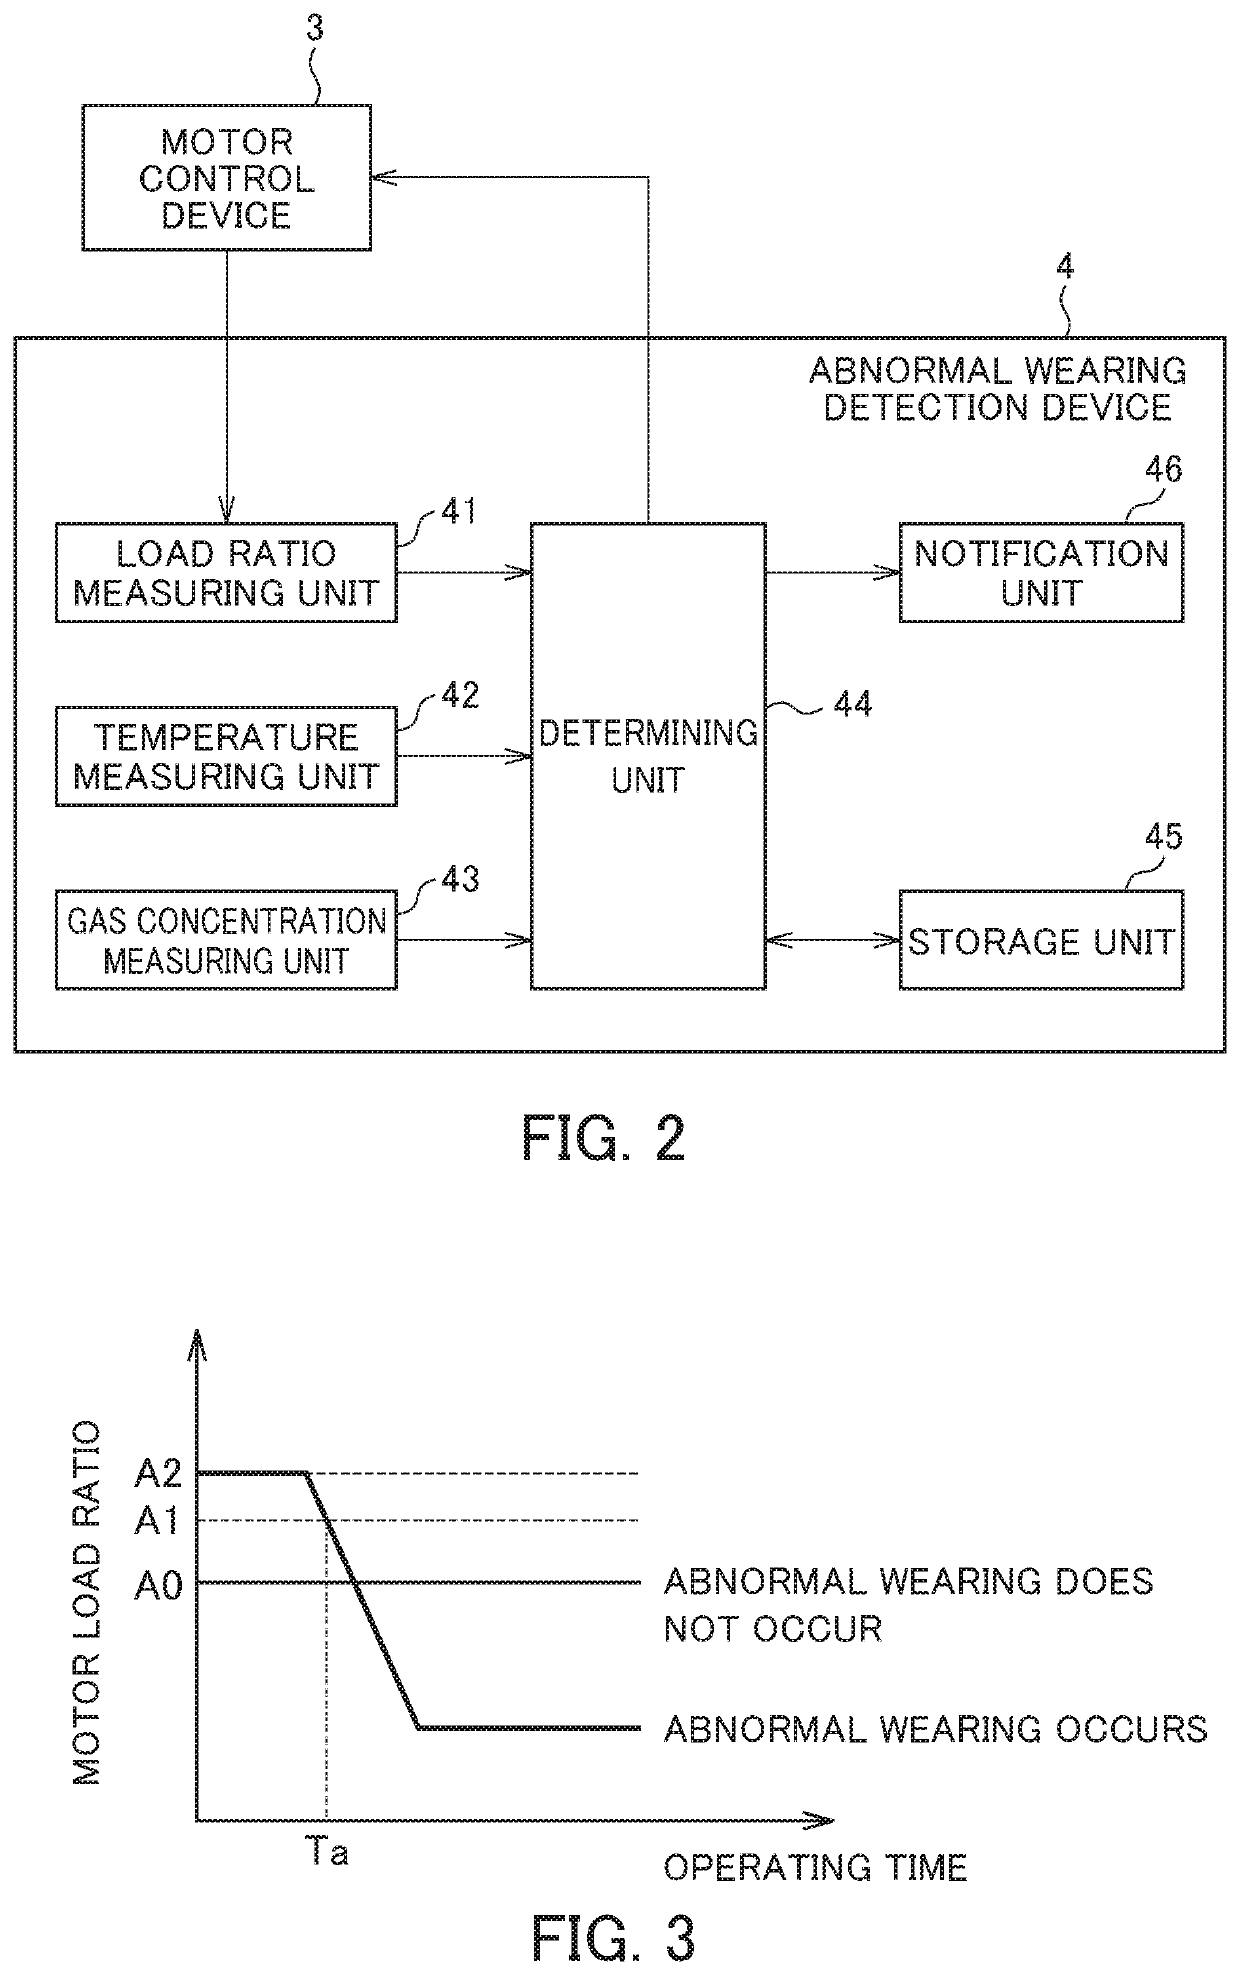 Abnormal wearing detection device for seal members and rotor device